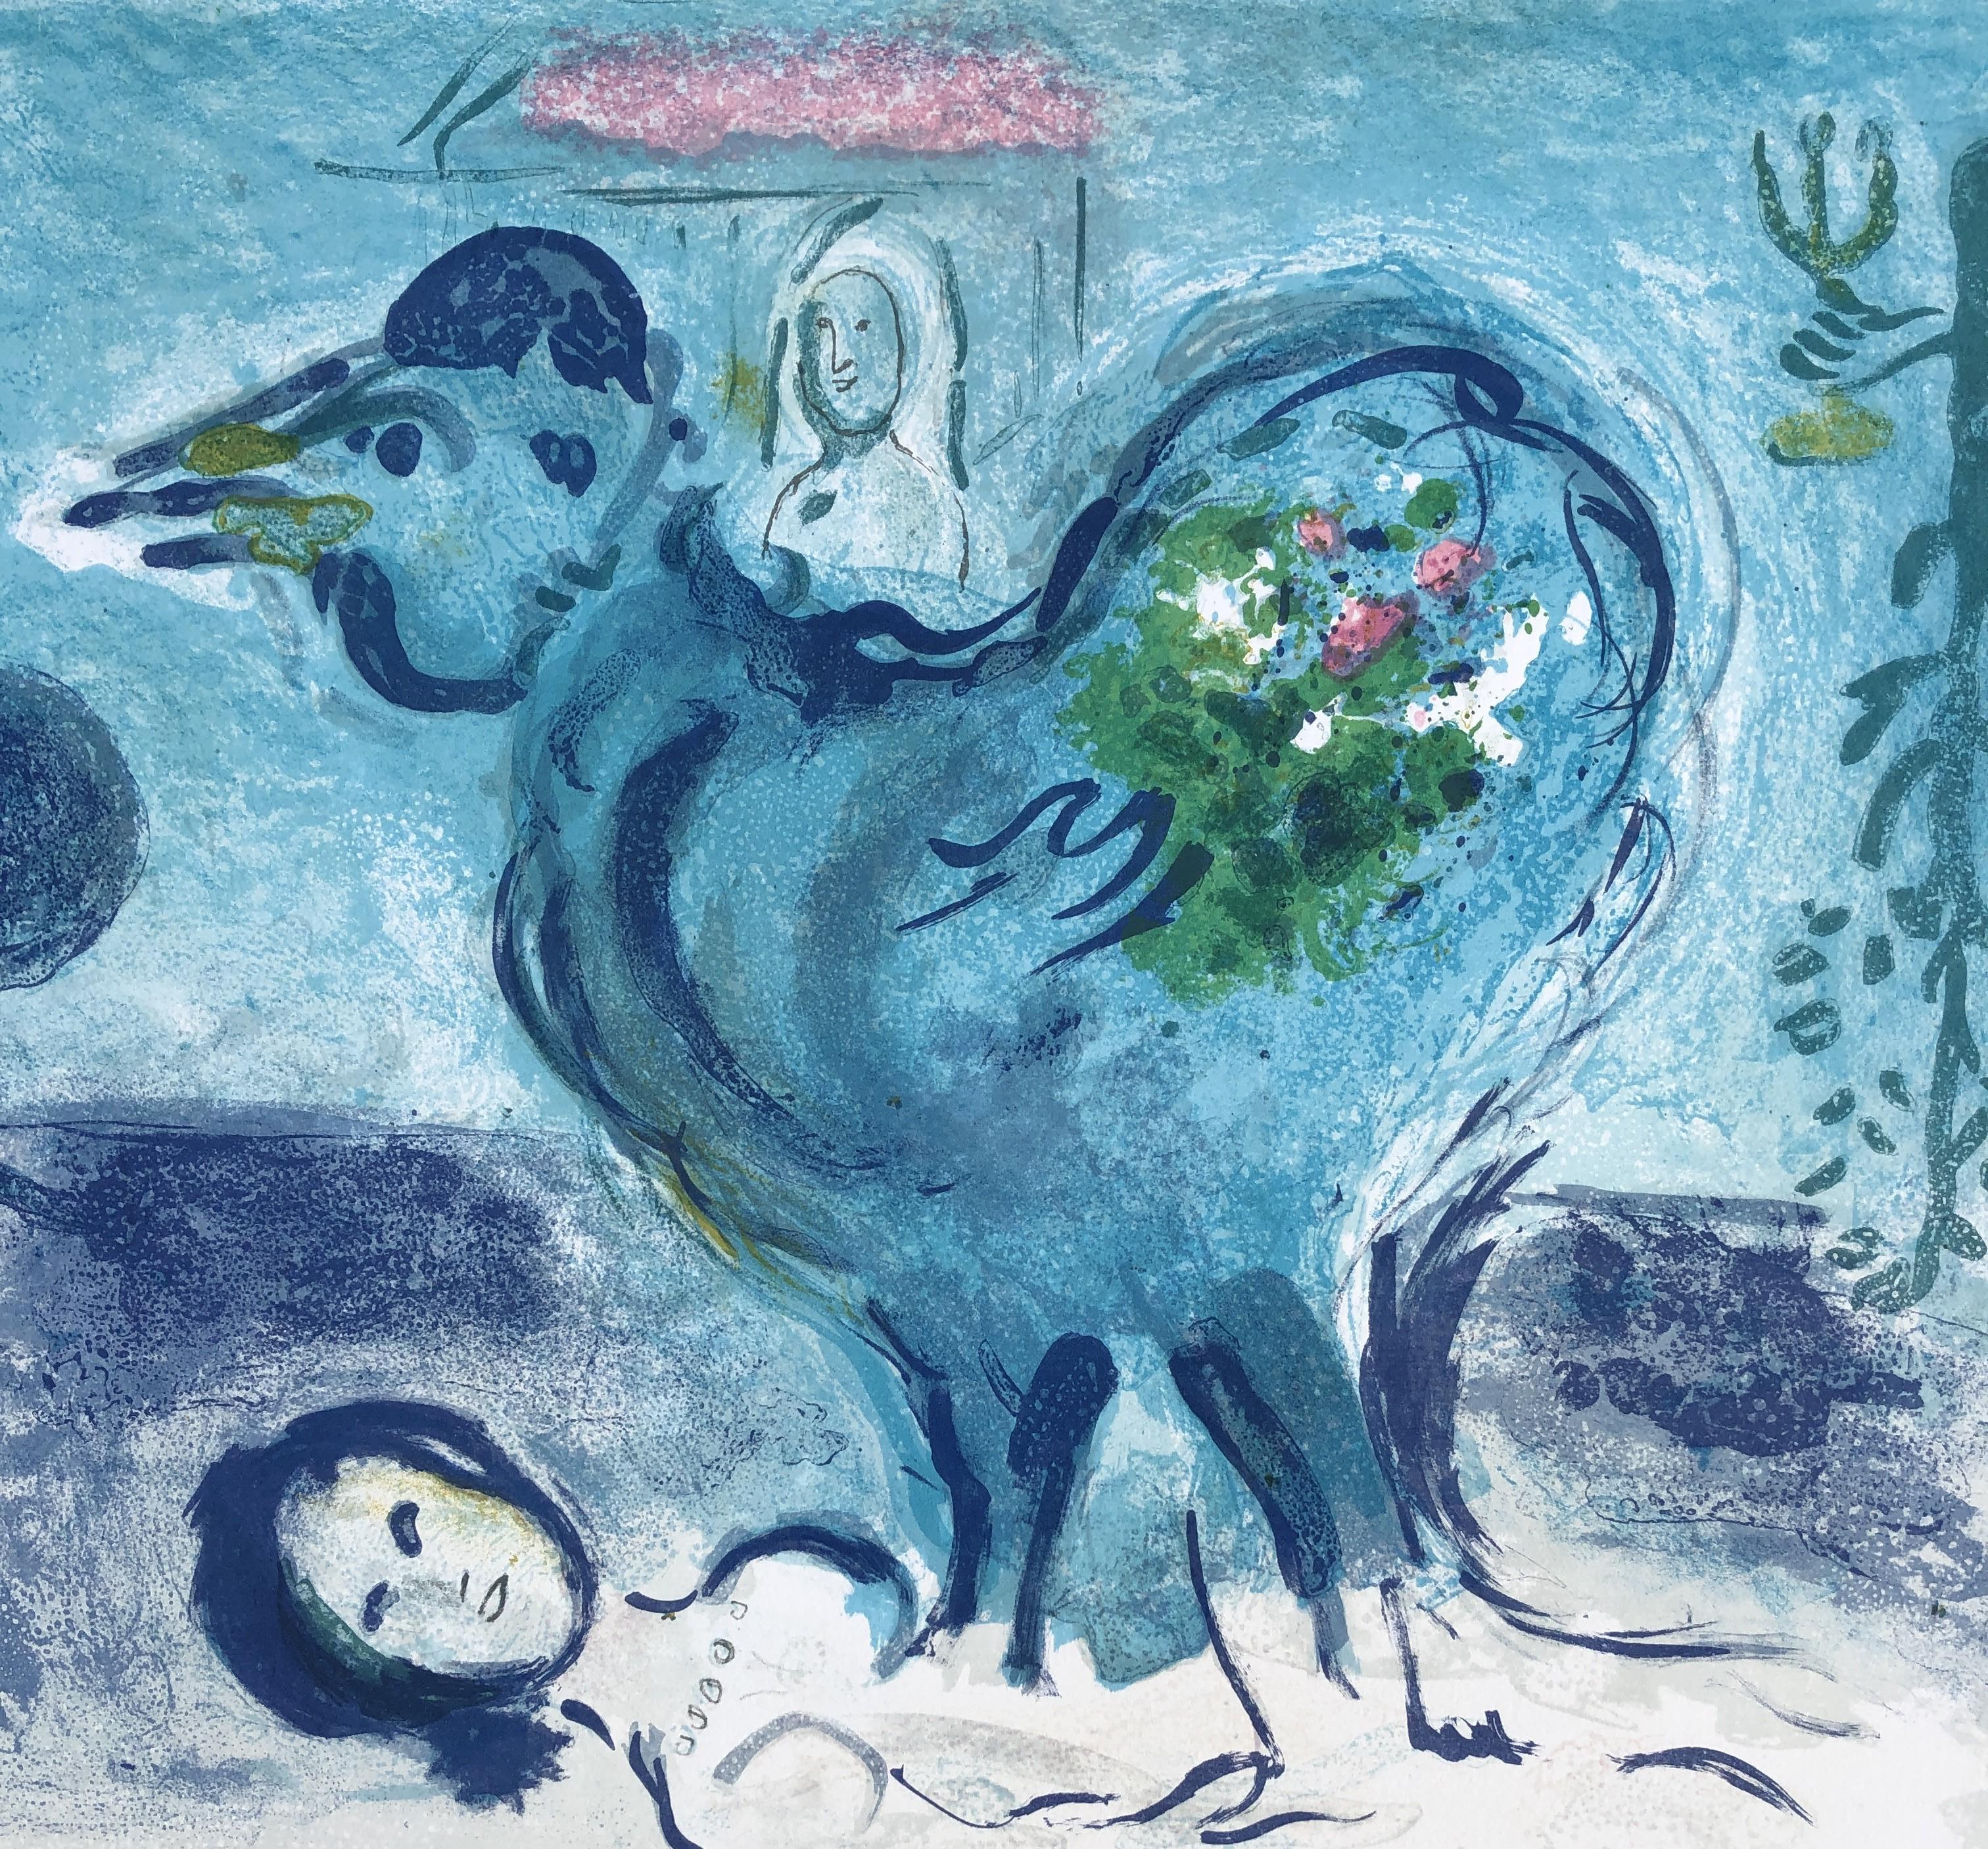 Marc CHAGALL
Landscape with rooster (Paysage au coq)

Original lithograph, 1958
Handsigned in pencil
Published by Maeght, Paris
Annotated 